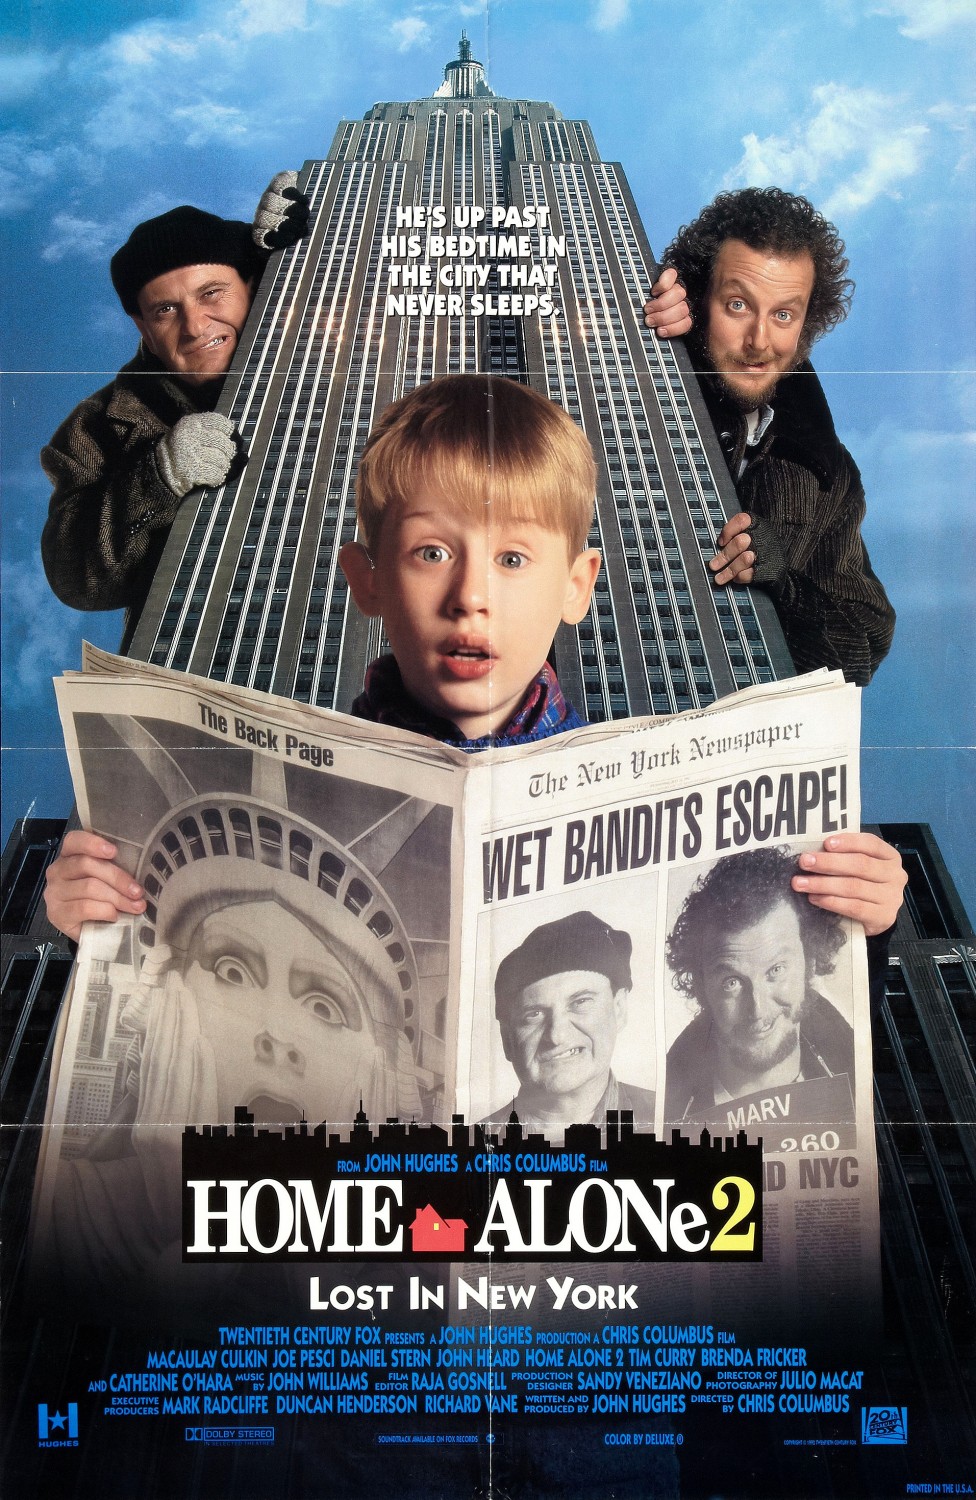 Home Alone 2: Lost in New York (#2 of 4): Extra Large Movie Poster Image - IMP Awards